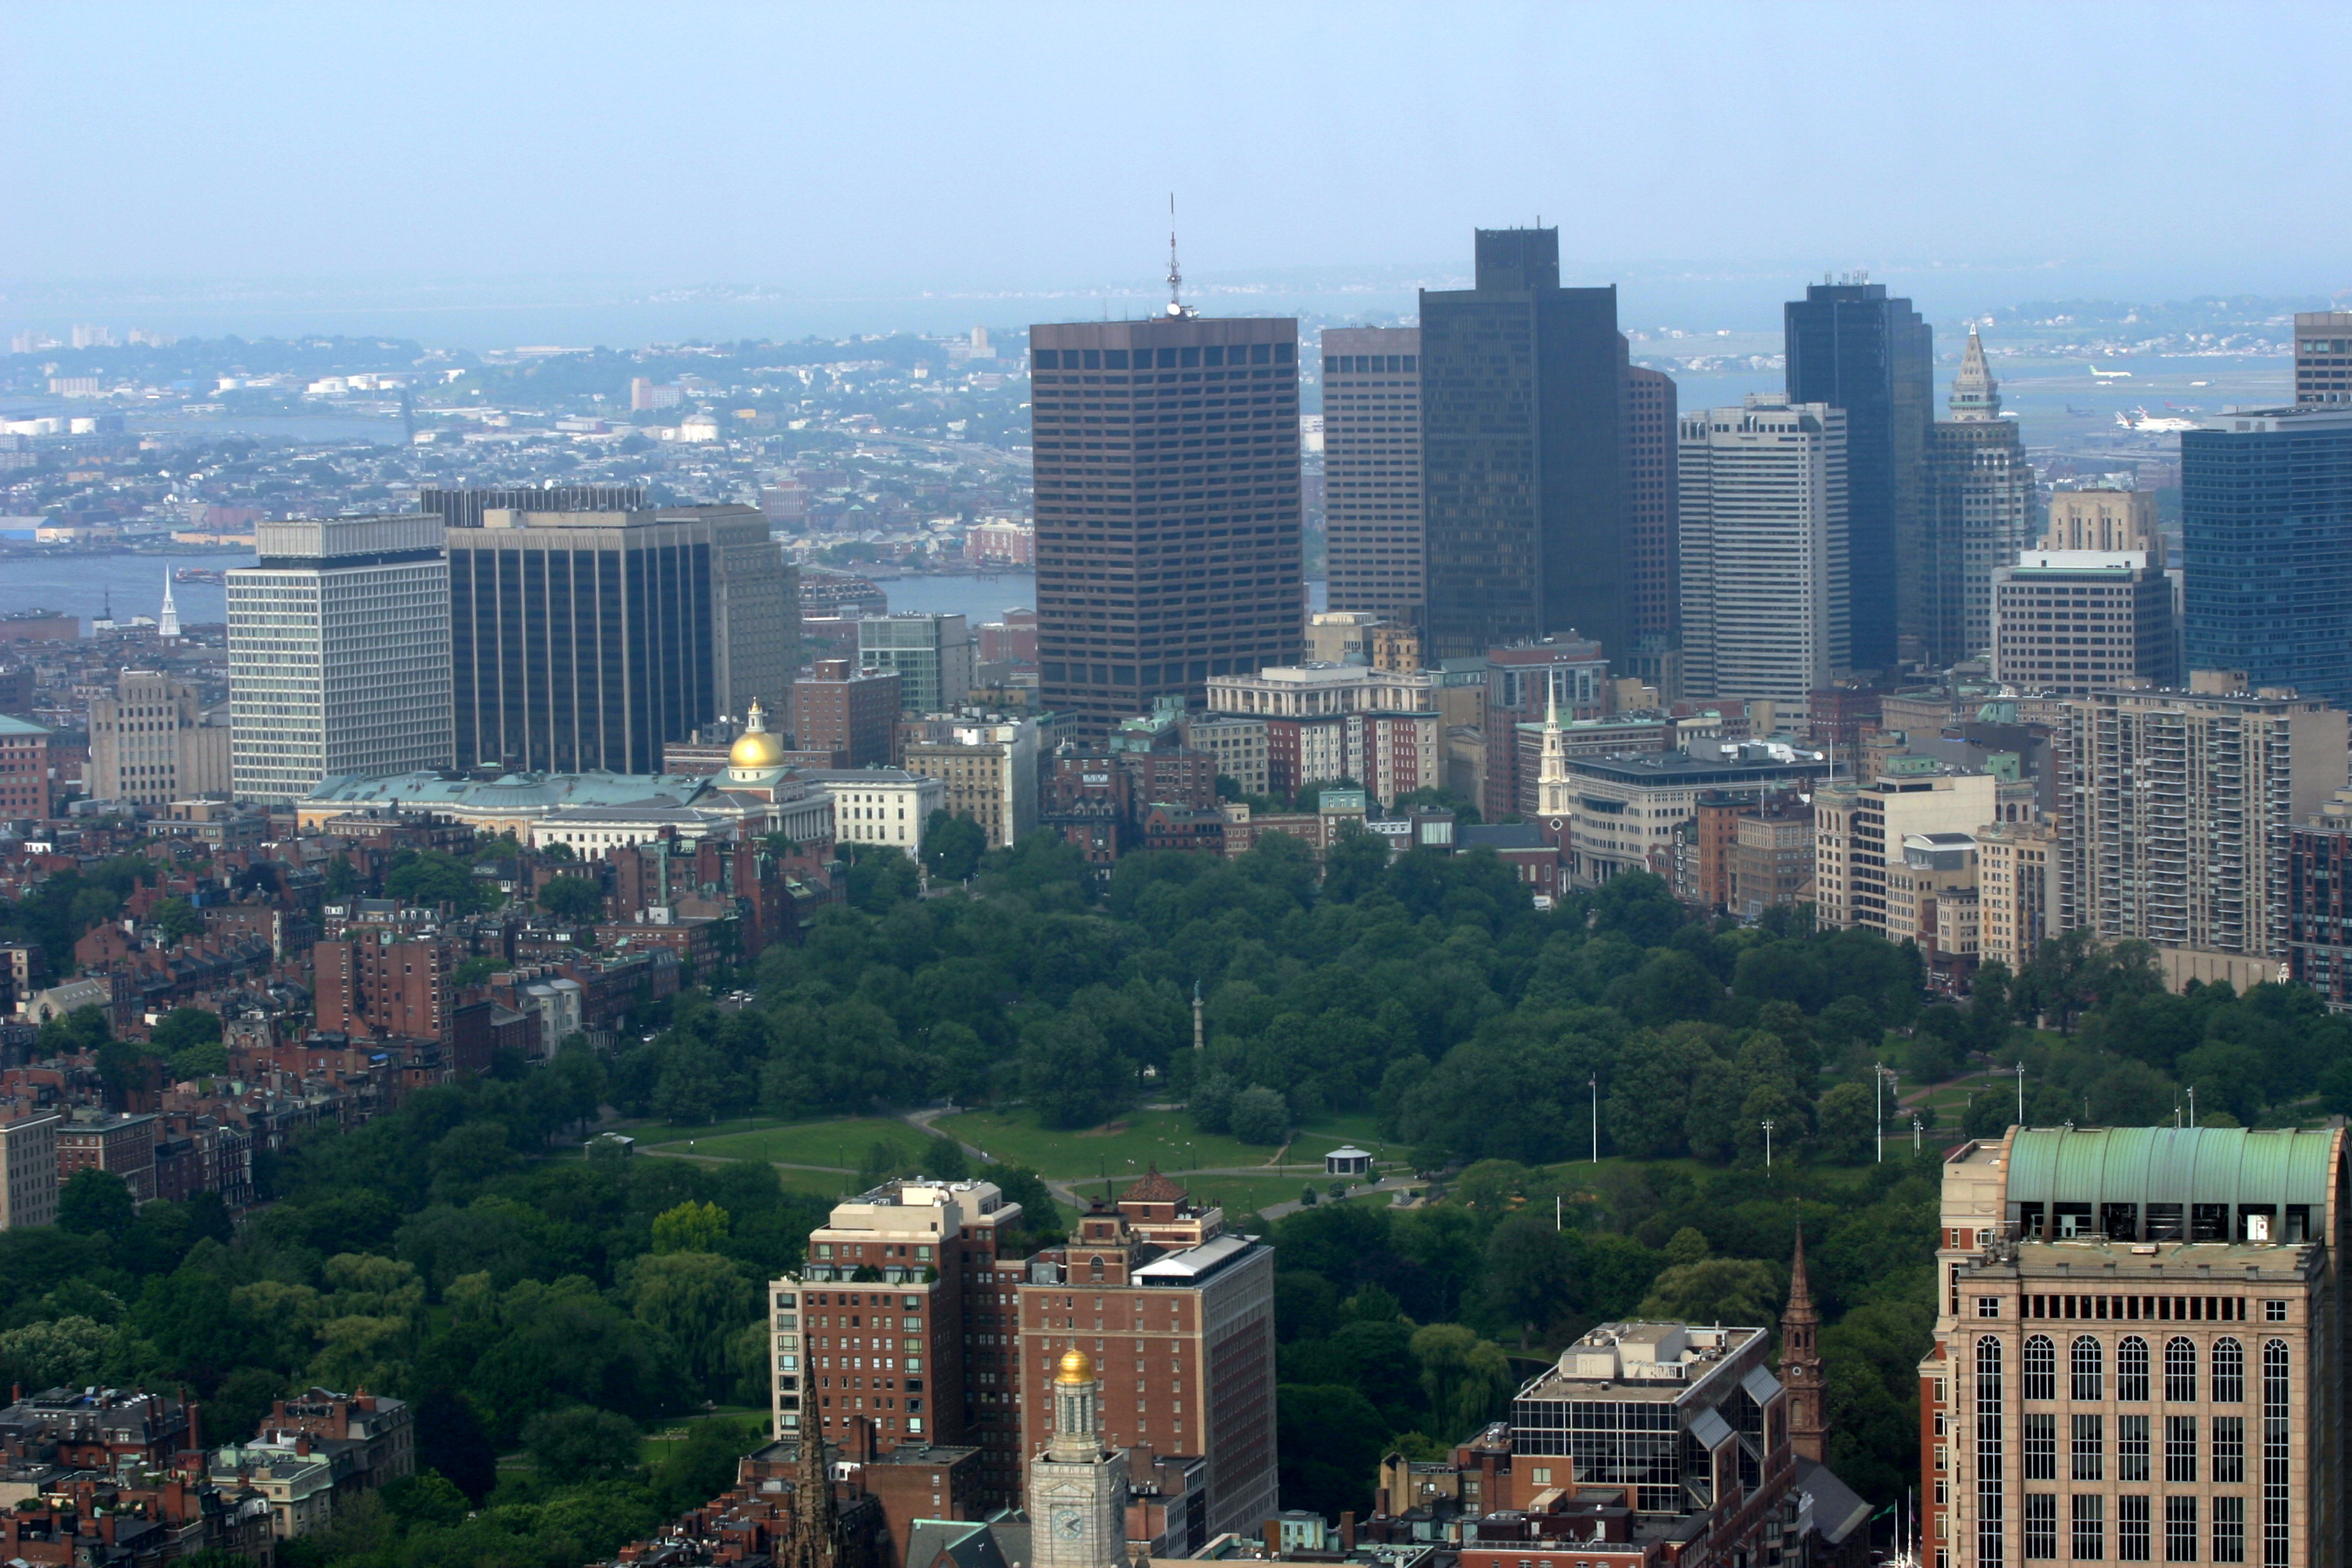 Boston Common from the Prudential Center Photo by Jared C. Benedict (Own work) via Wikimedia Commons